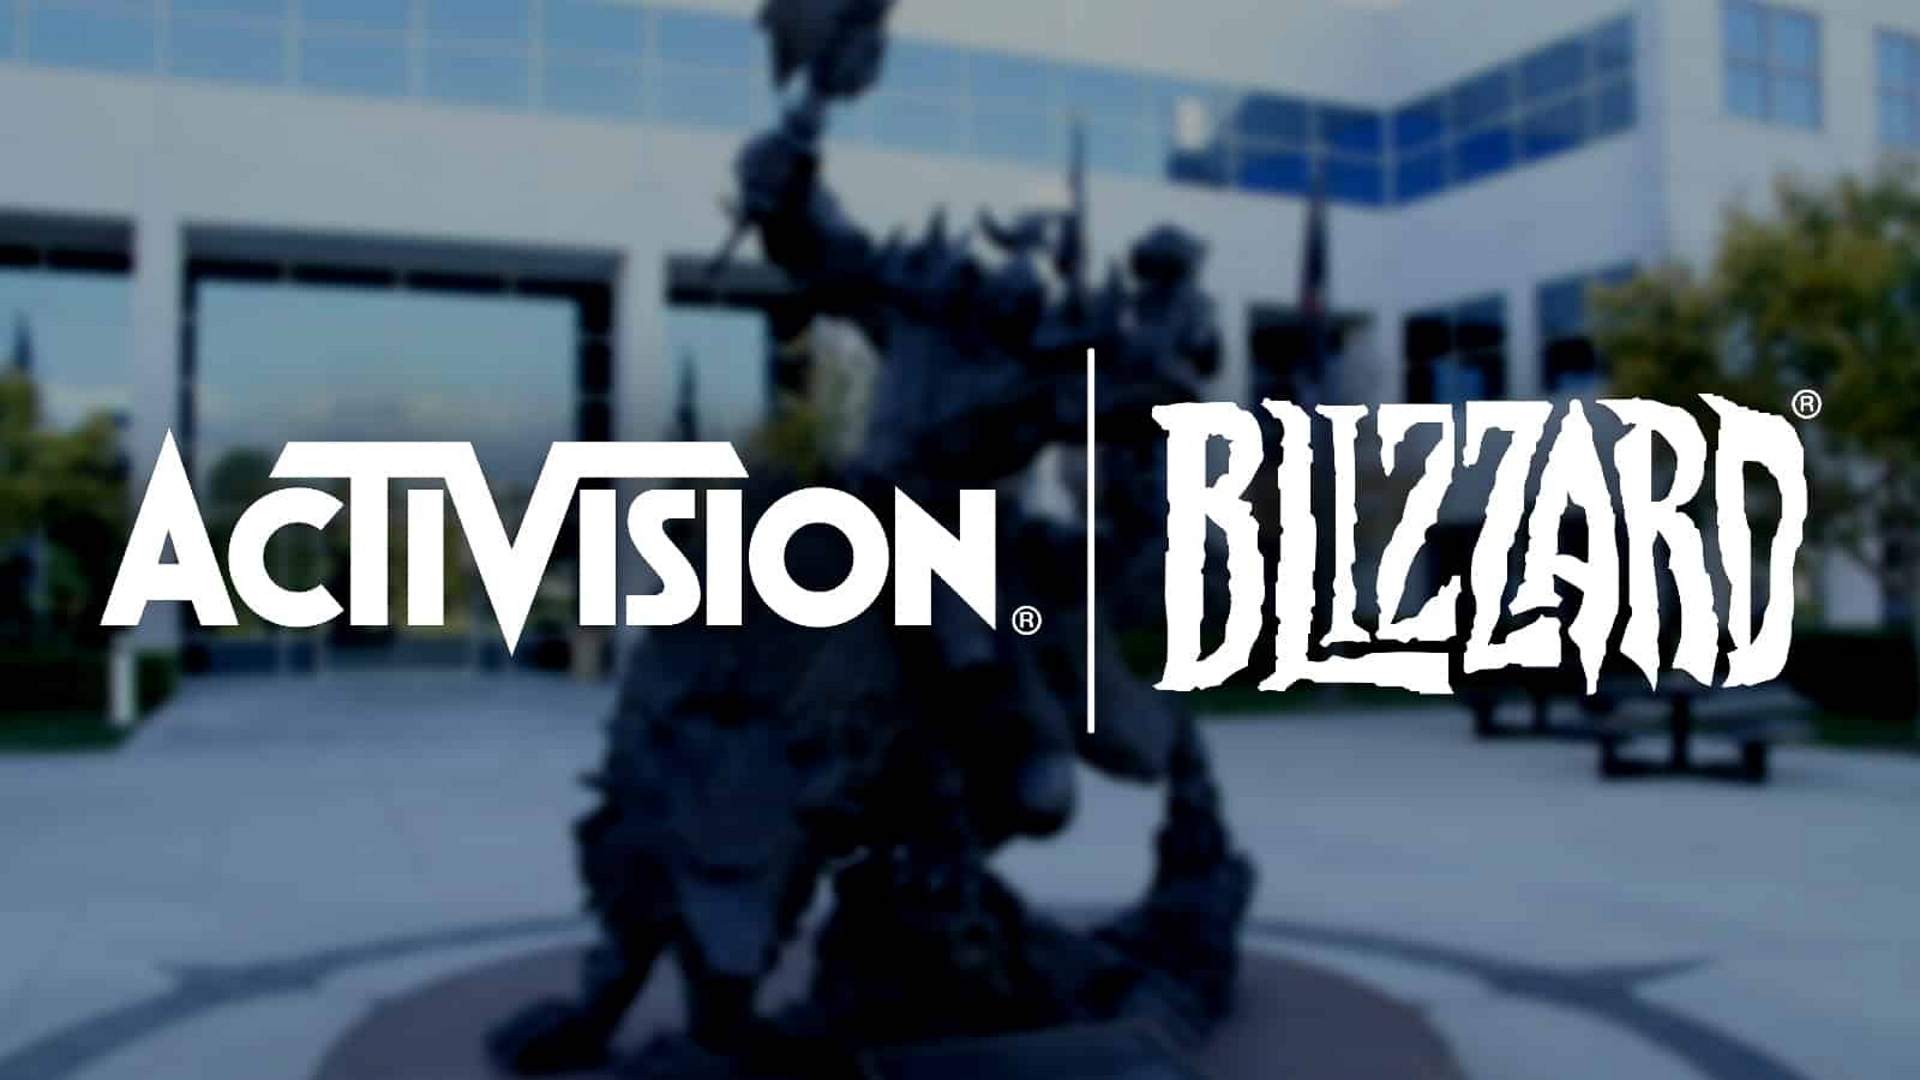 Activision Blizzard shareholders want reports on harassment cases